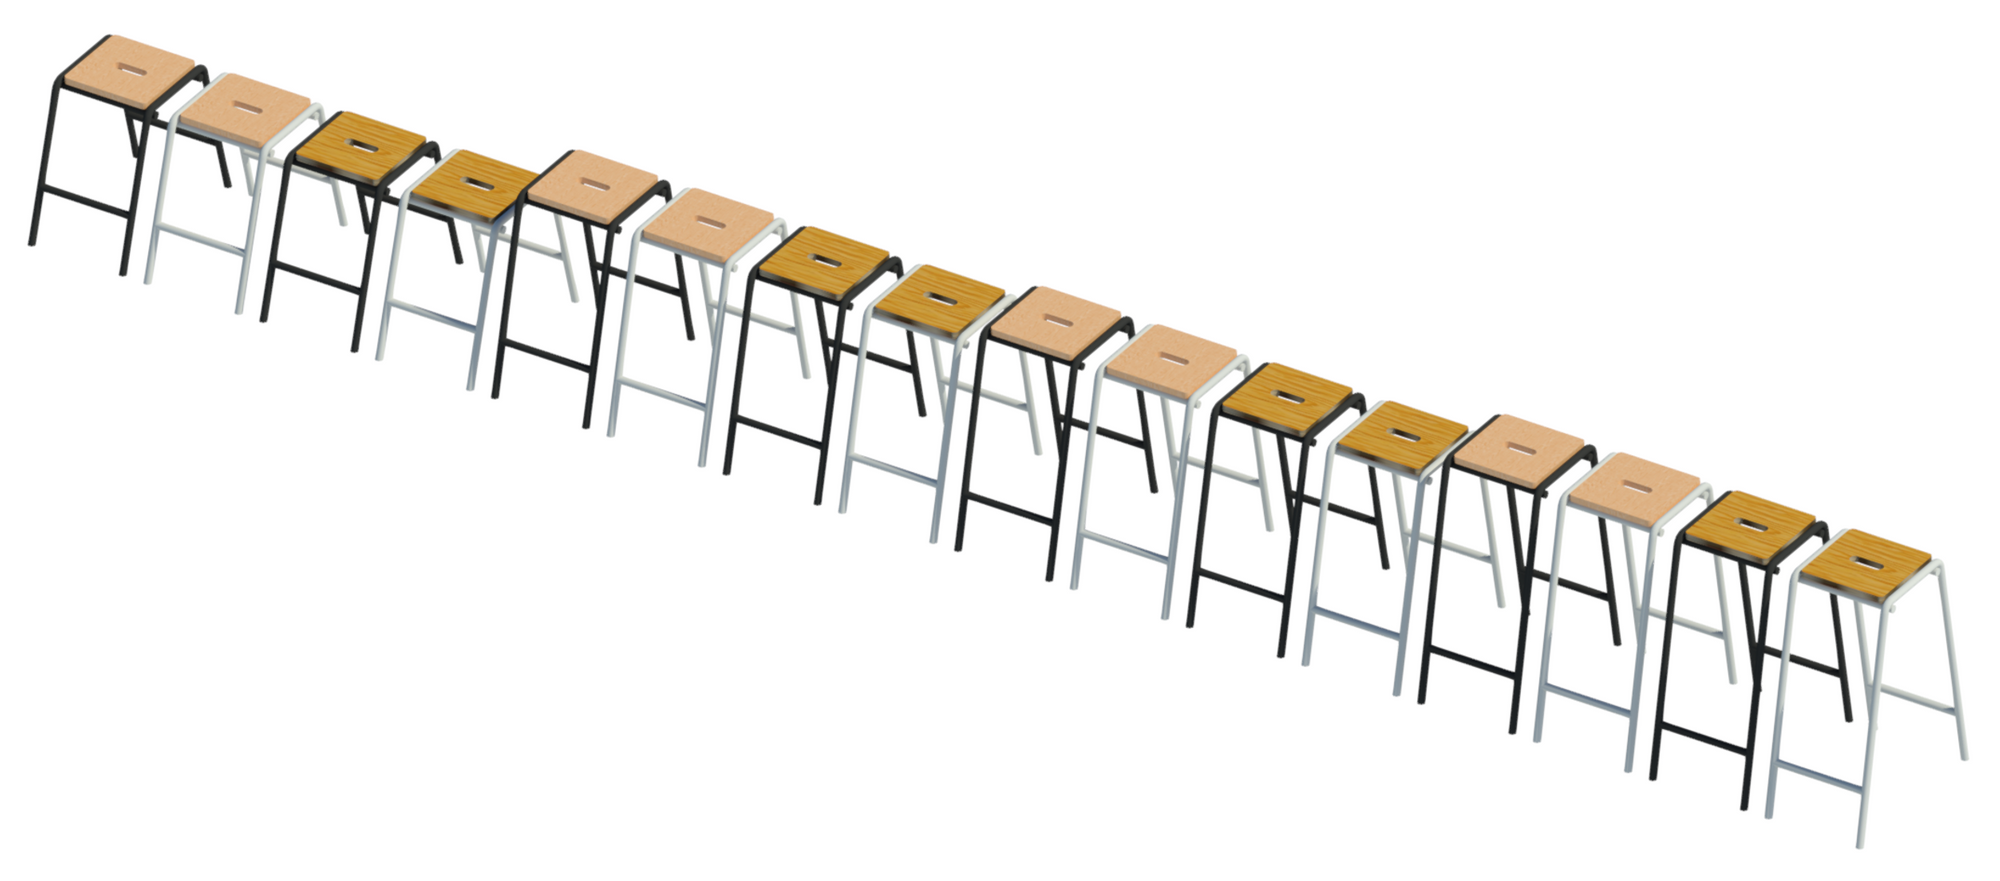 3D image showing high stool Revit family types.